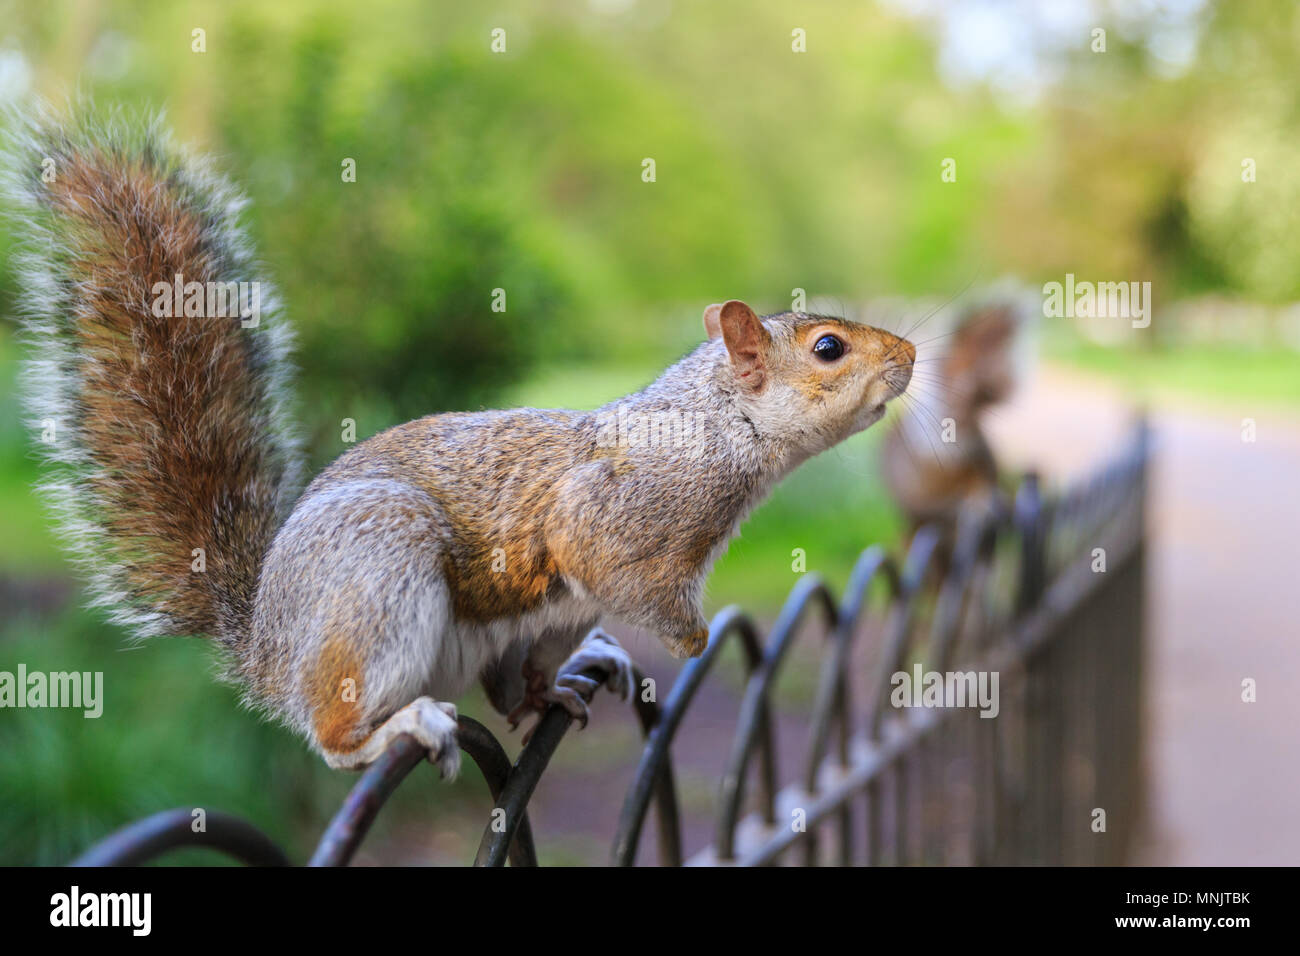 A  cute Eastern gray squirrel (Sciurus carolinensis), or grey squirrel, sits on a fence in a park, sunny day, UK Stock Photo